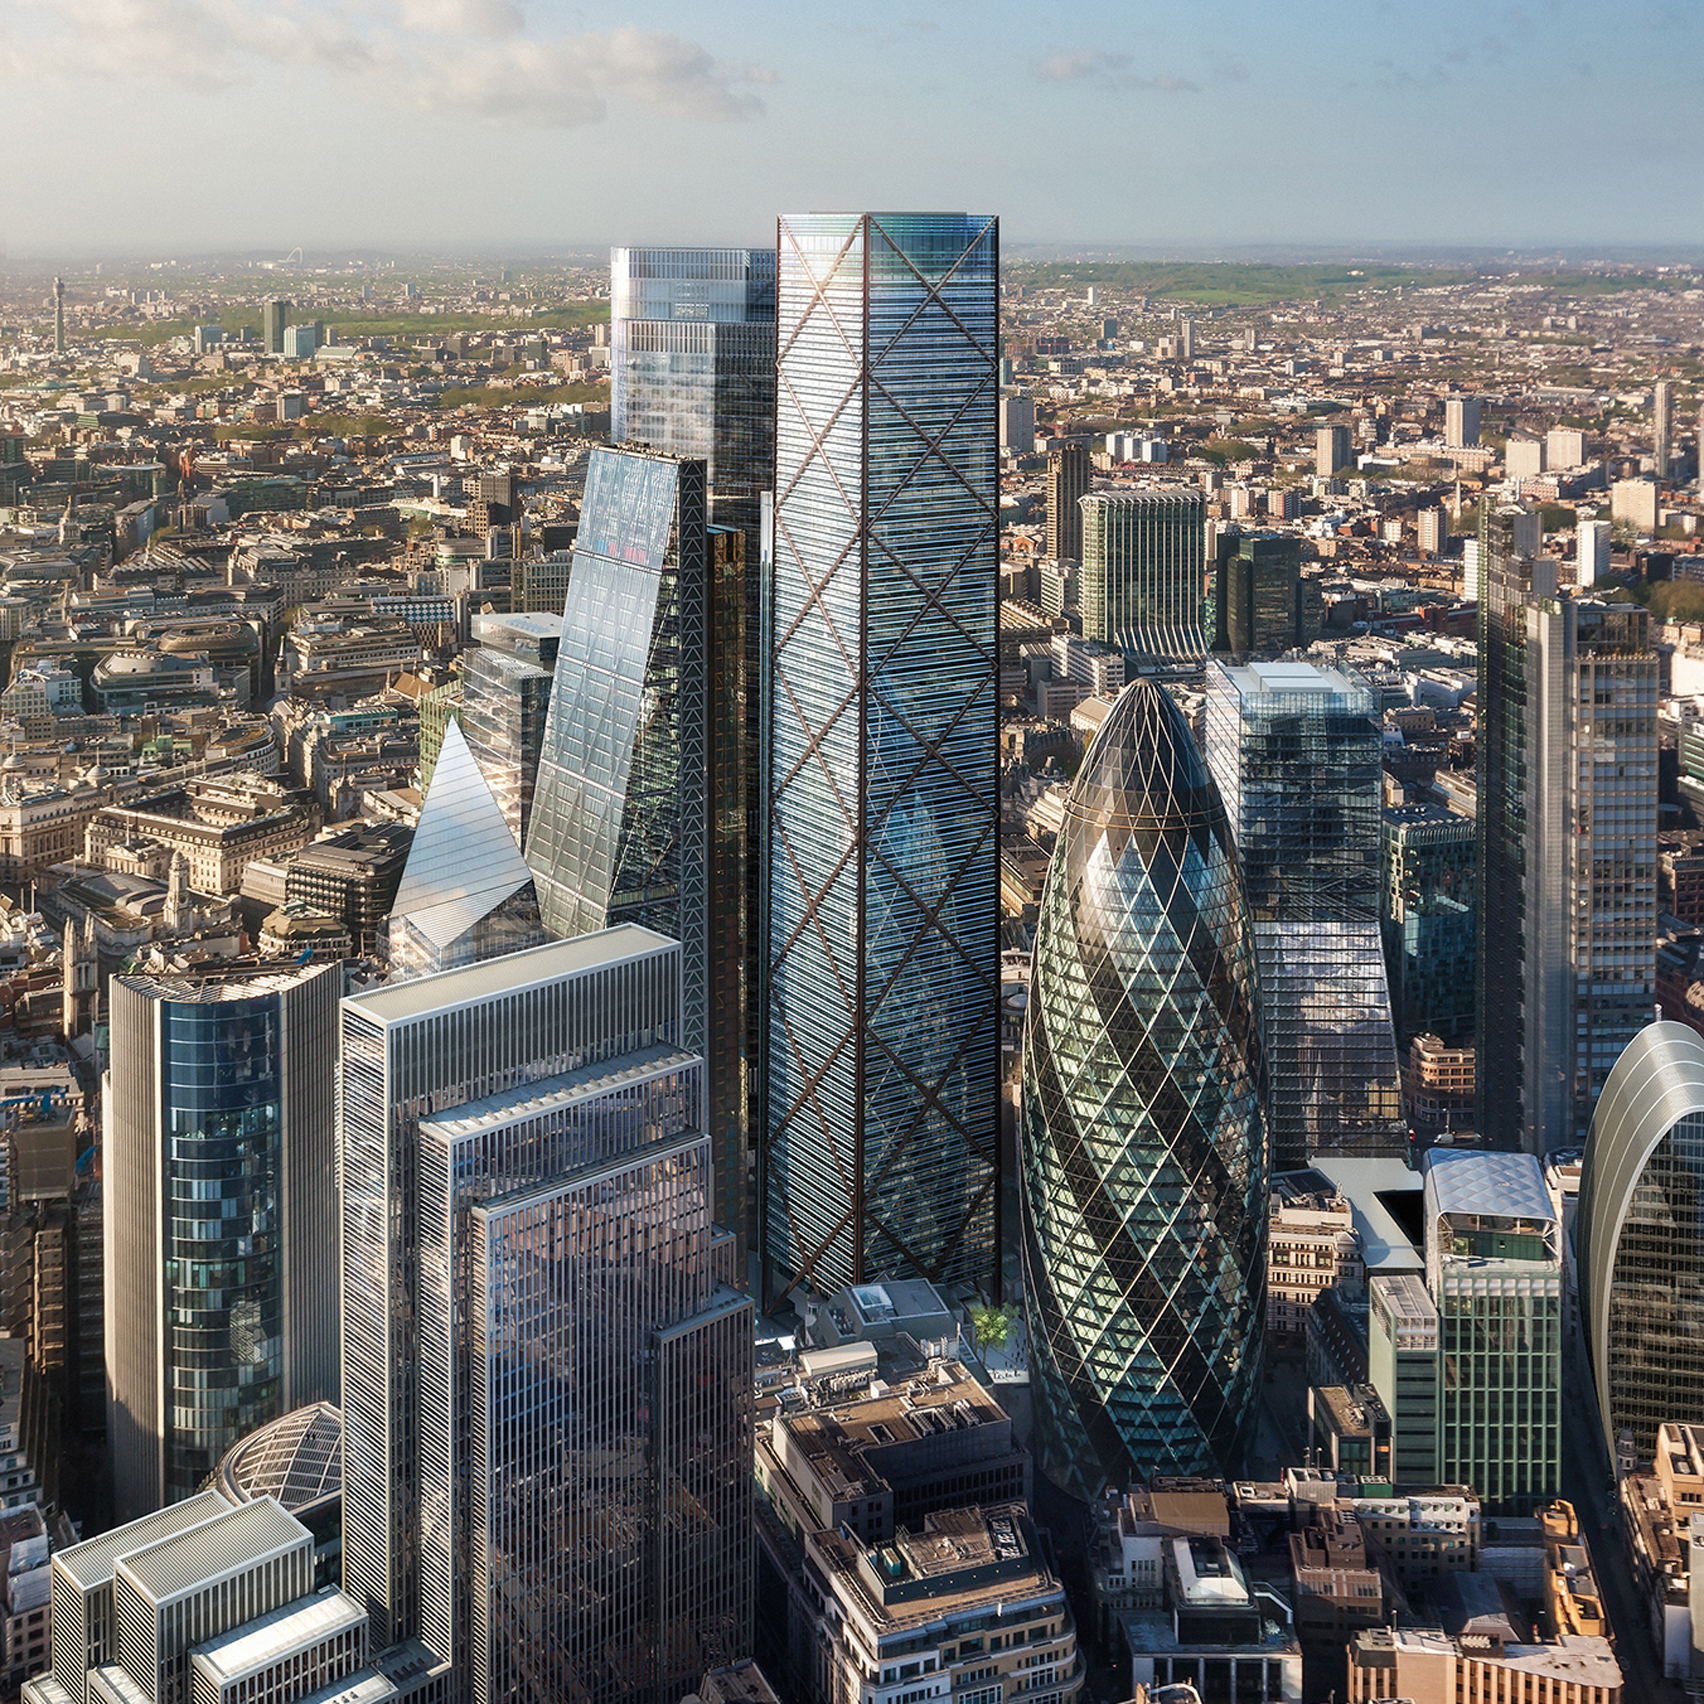 1 Undershaft planning permission by Eric Parry